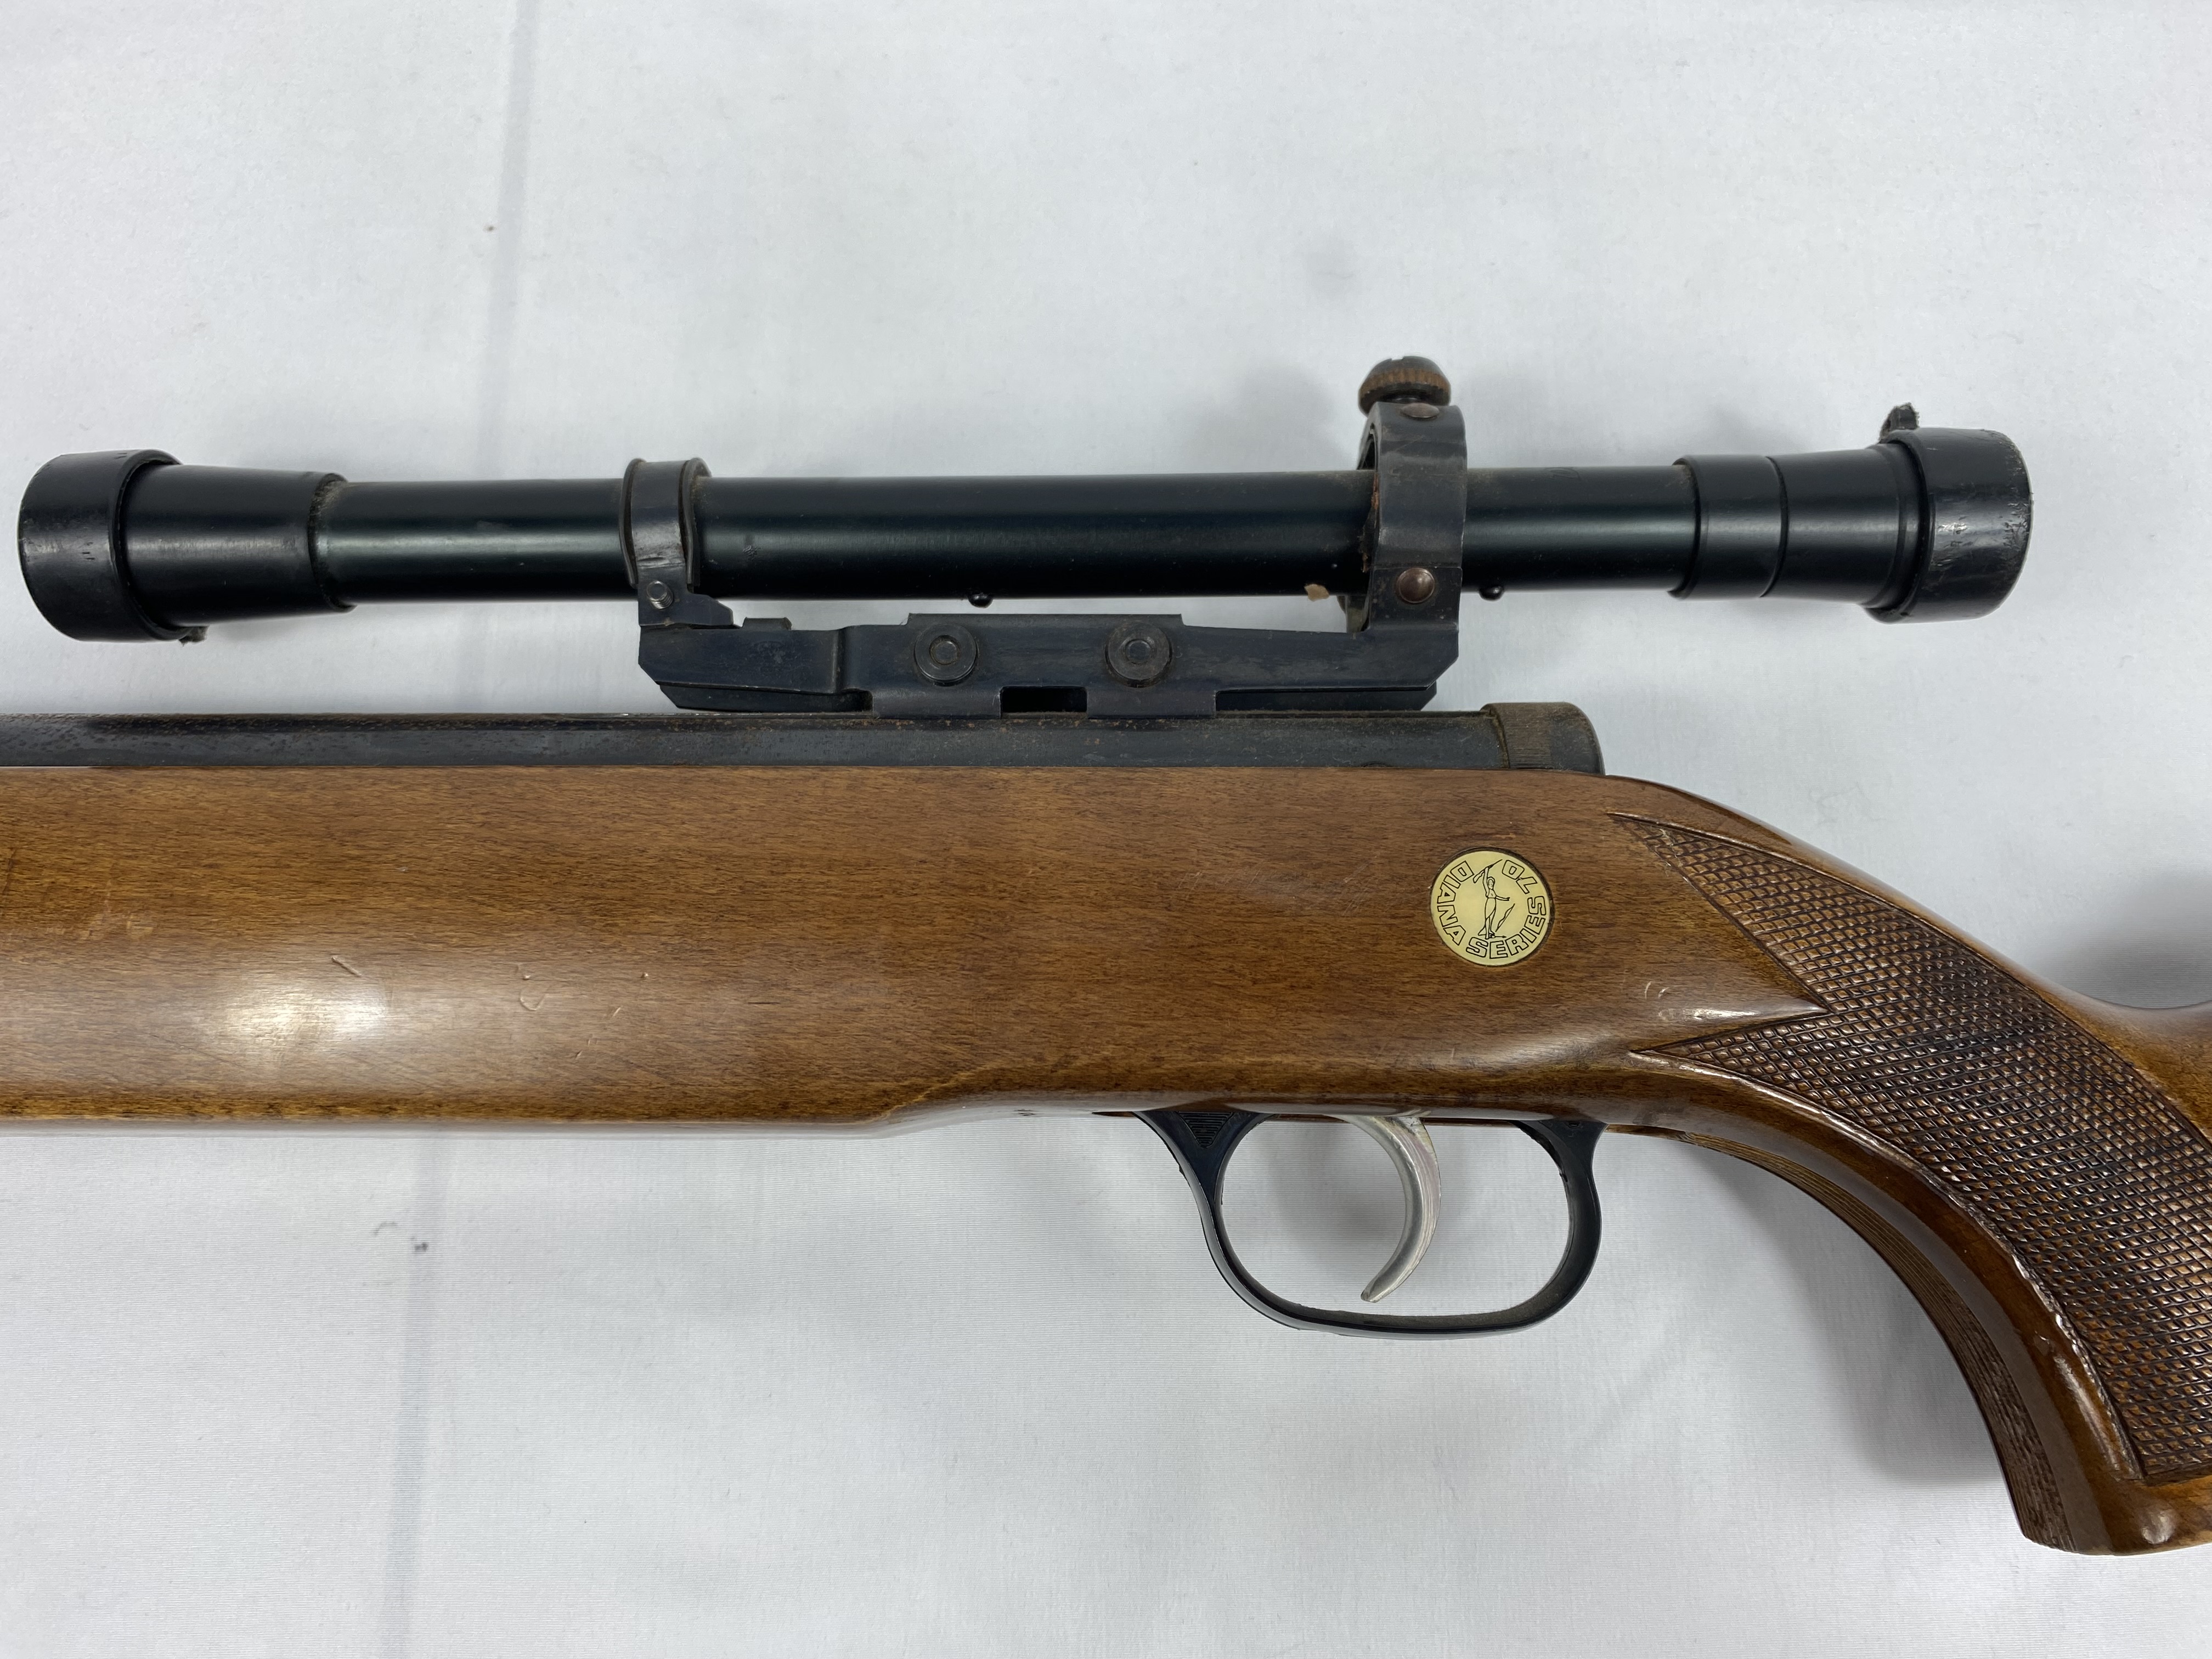 Diana Series 70 air rifle with 3x telescopic sight - Image 5 of 5